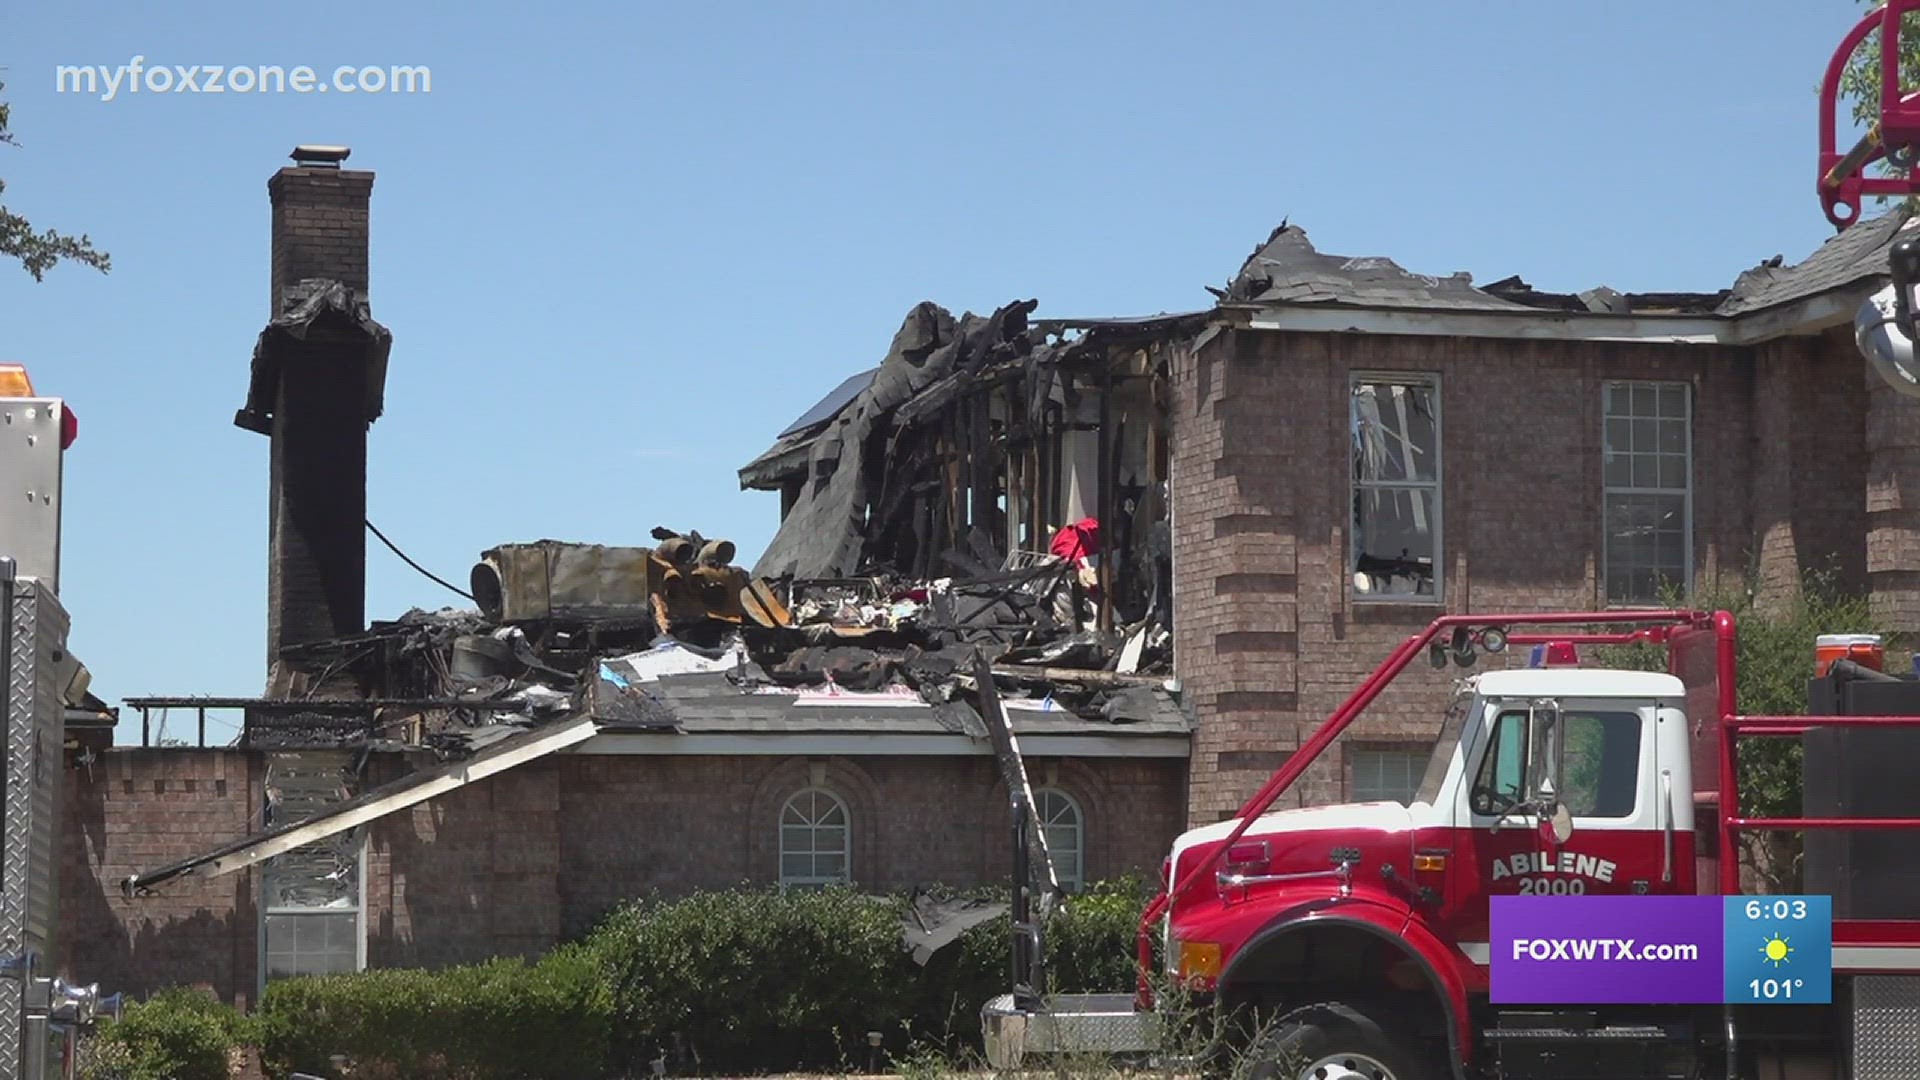 Fire in south Abilene causes $600K in estimated damages. The cause of the fire is currently under investigation.